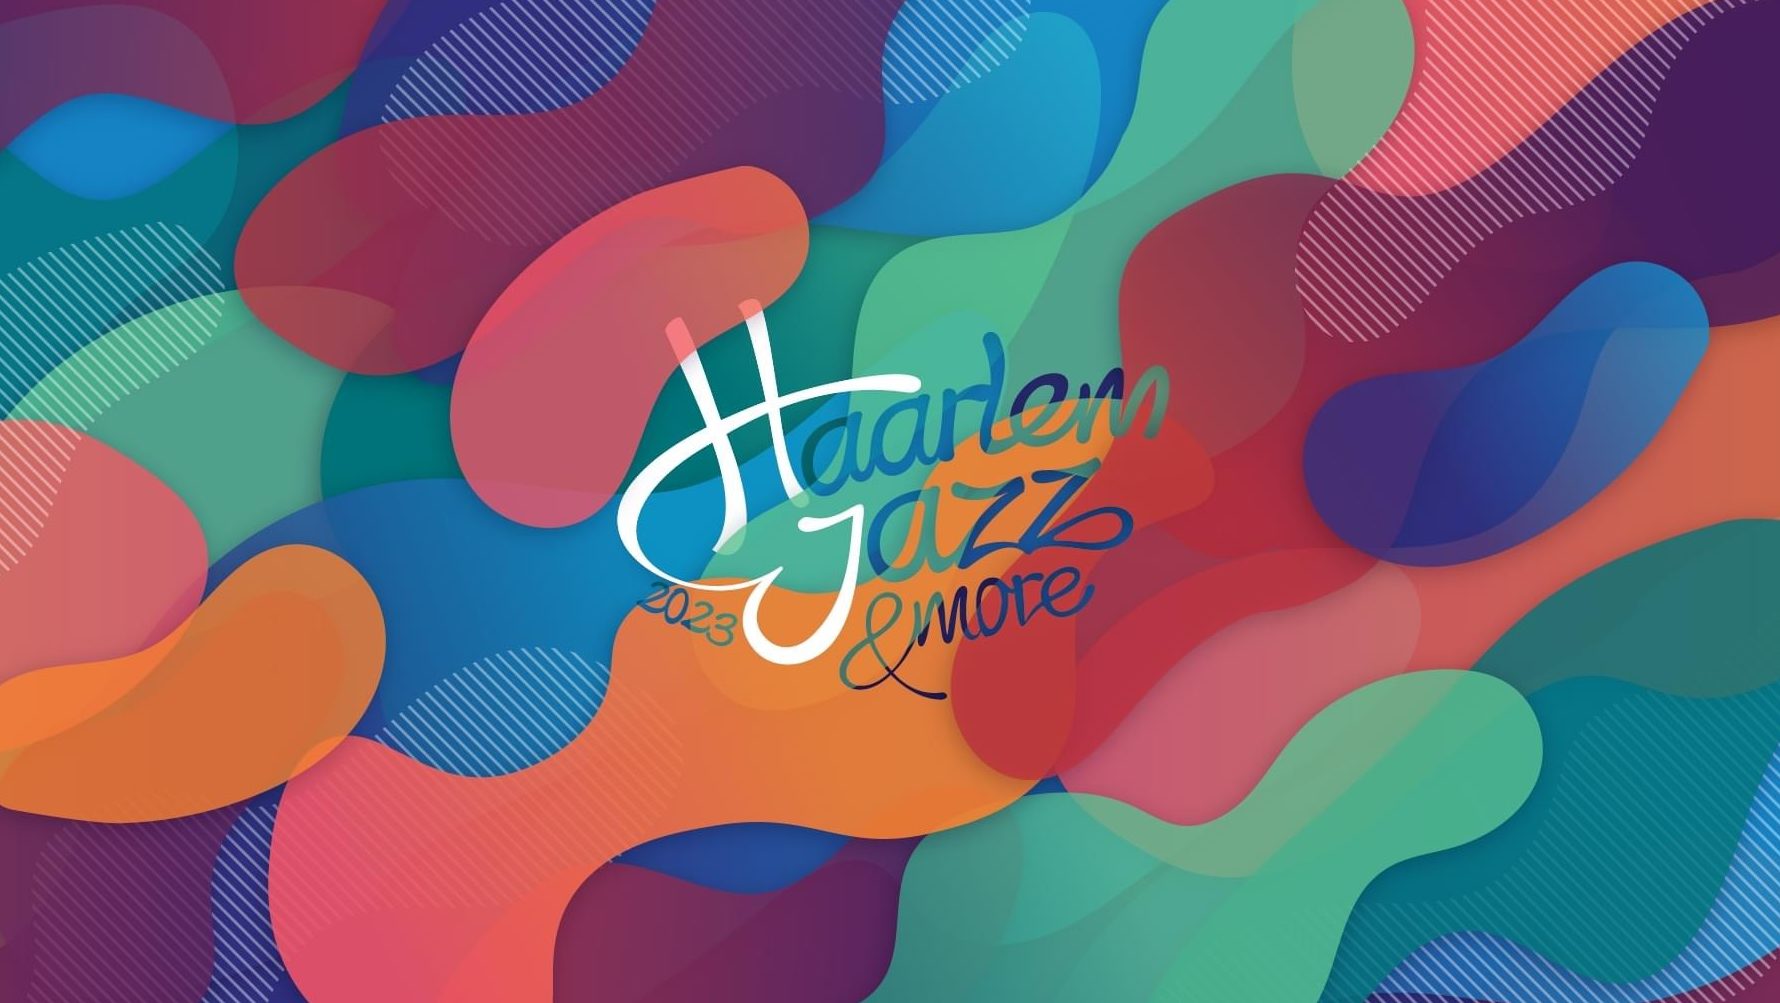 Haarlem Jazz And More 2023